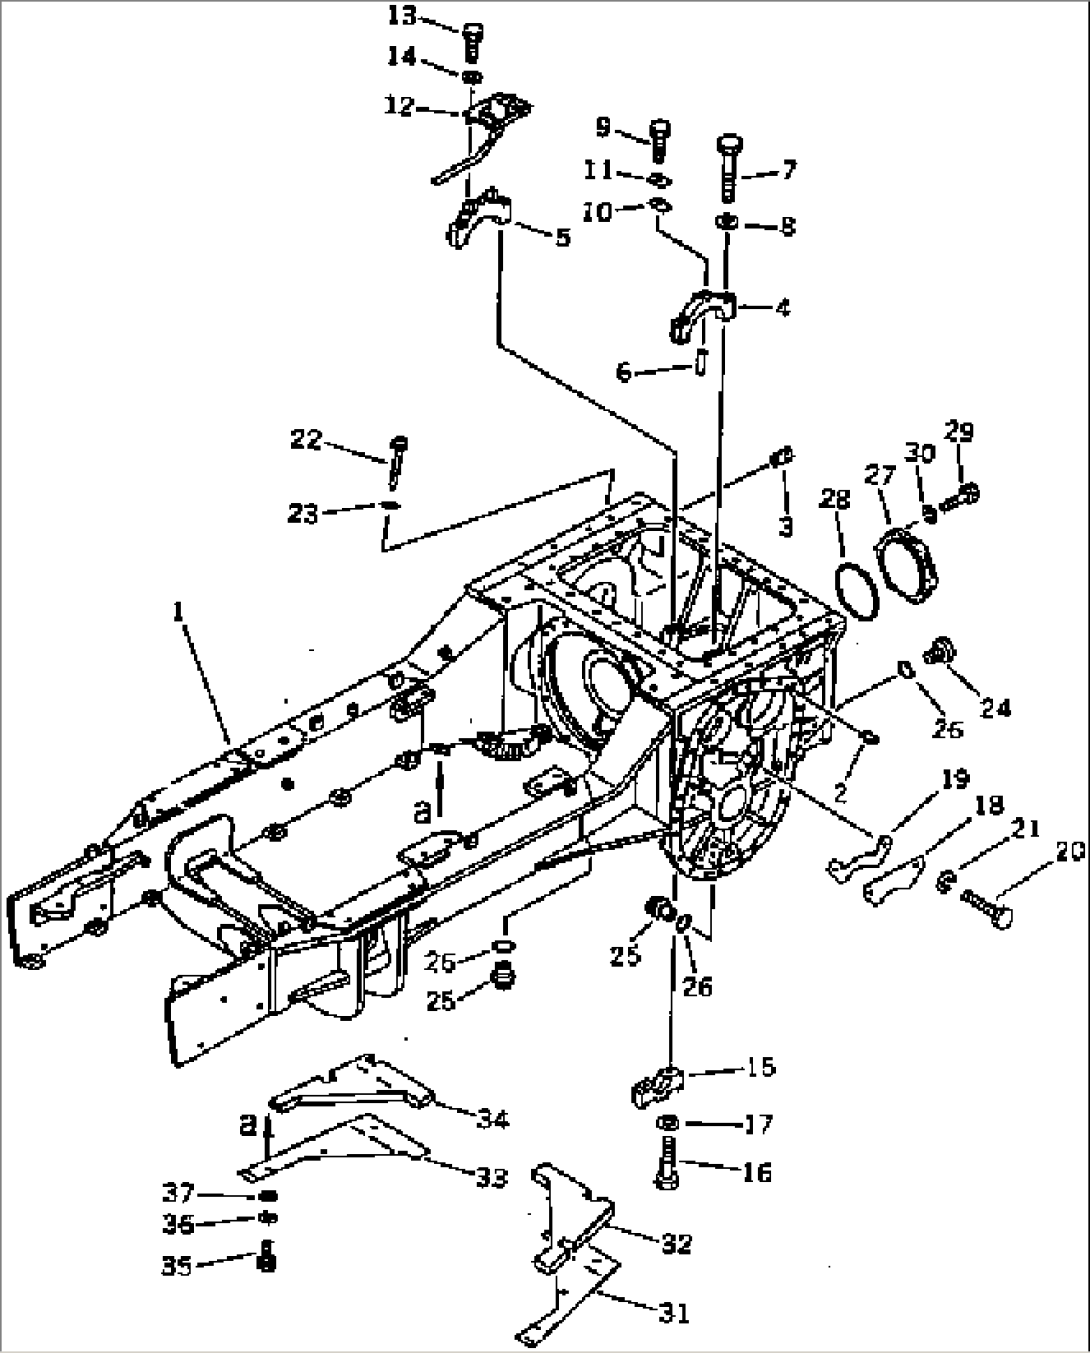 STEERING CASE AND MAIN FRAME (NOISE SUPPRESSION FOR EC)(#80338-)